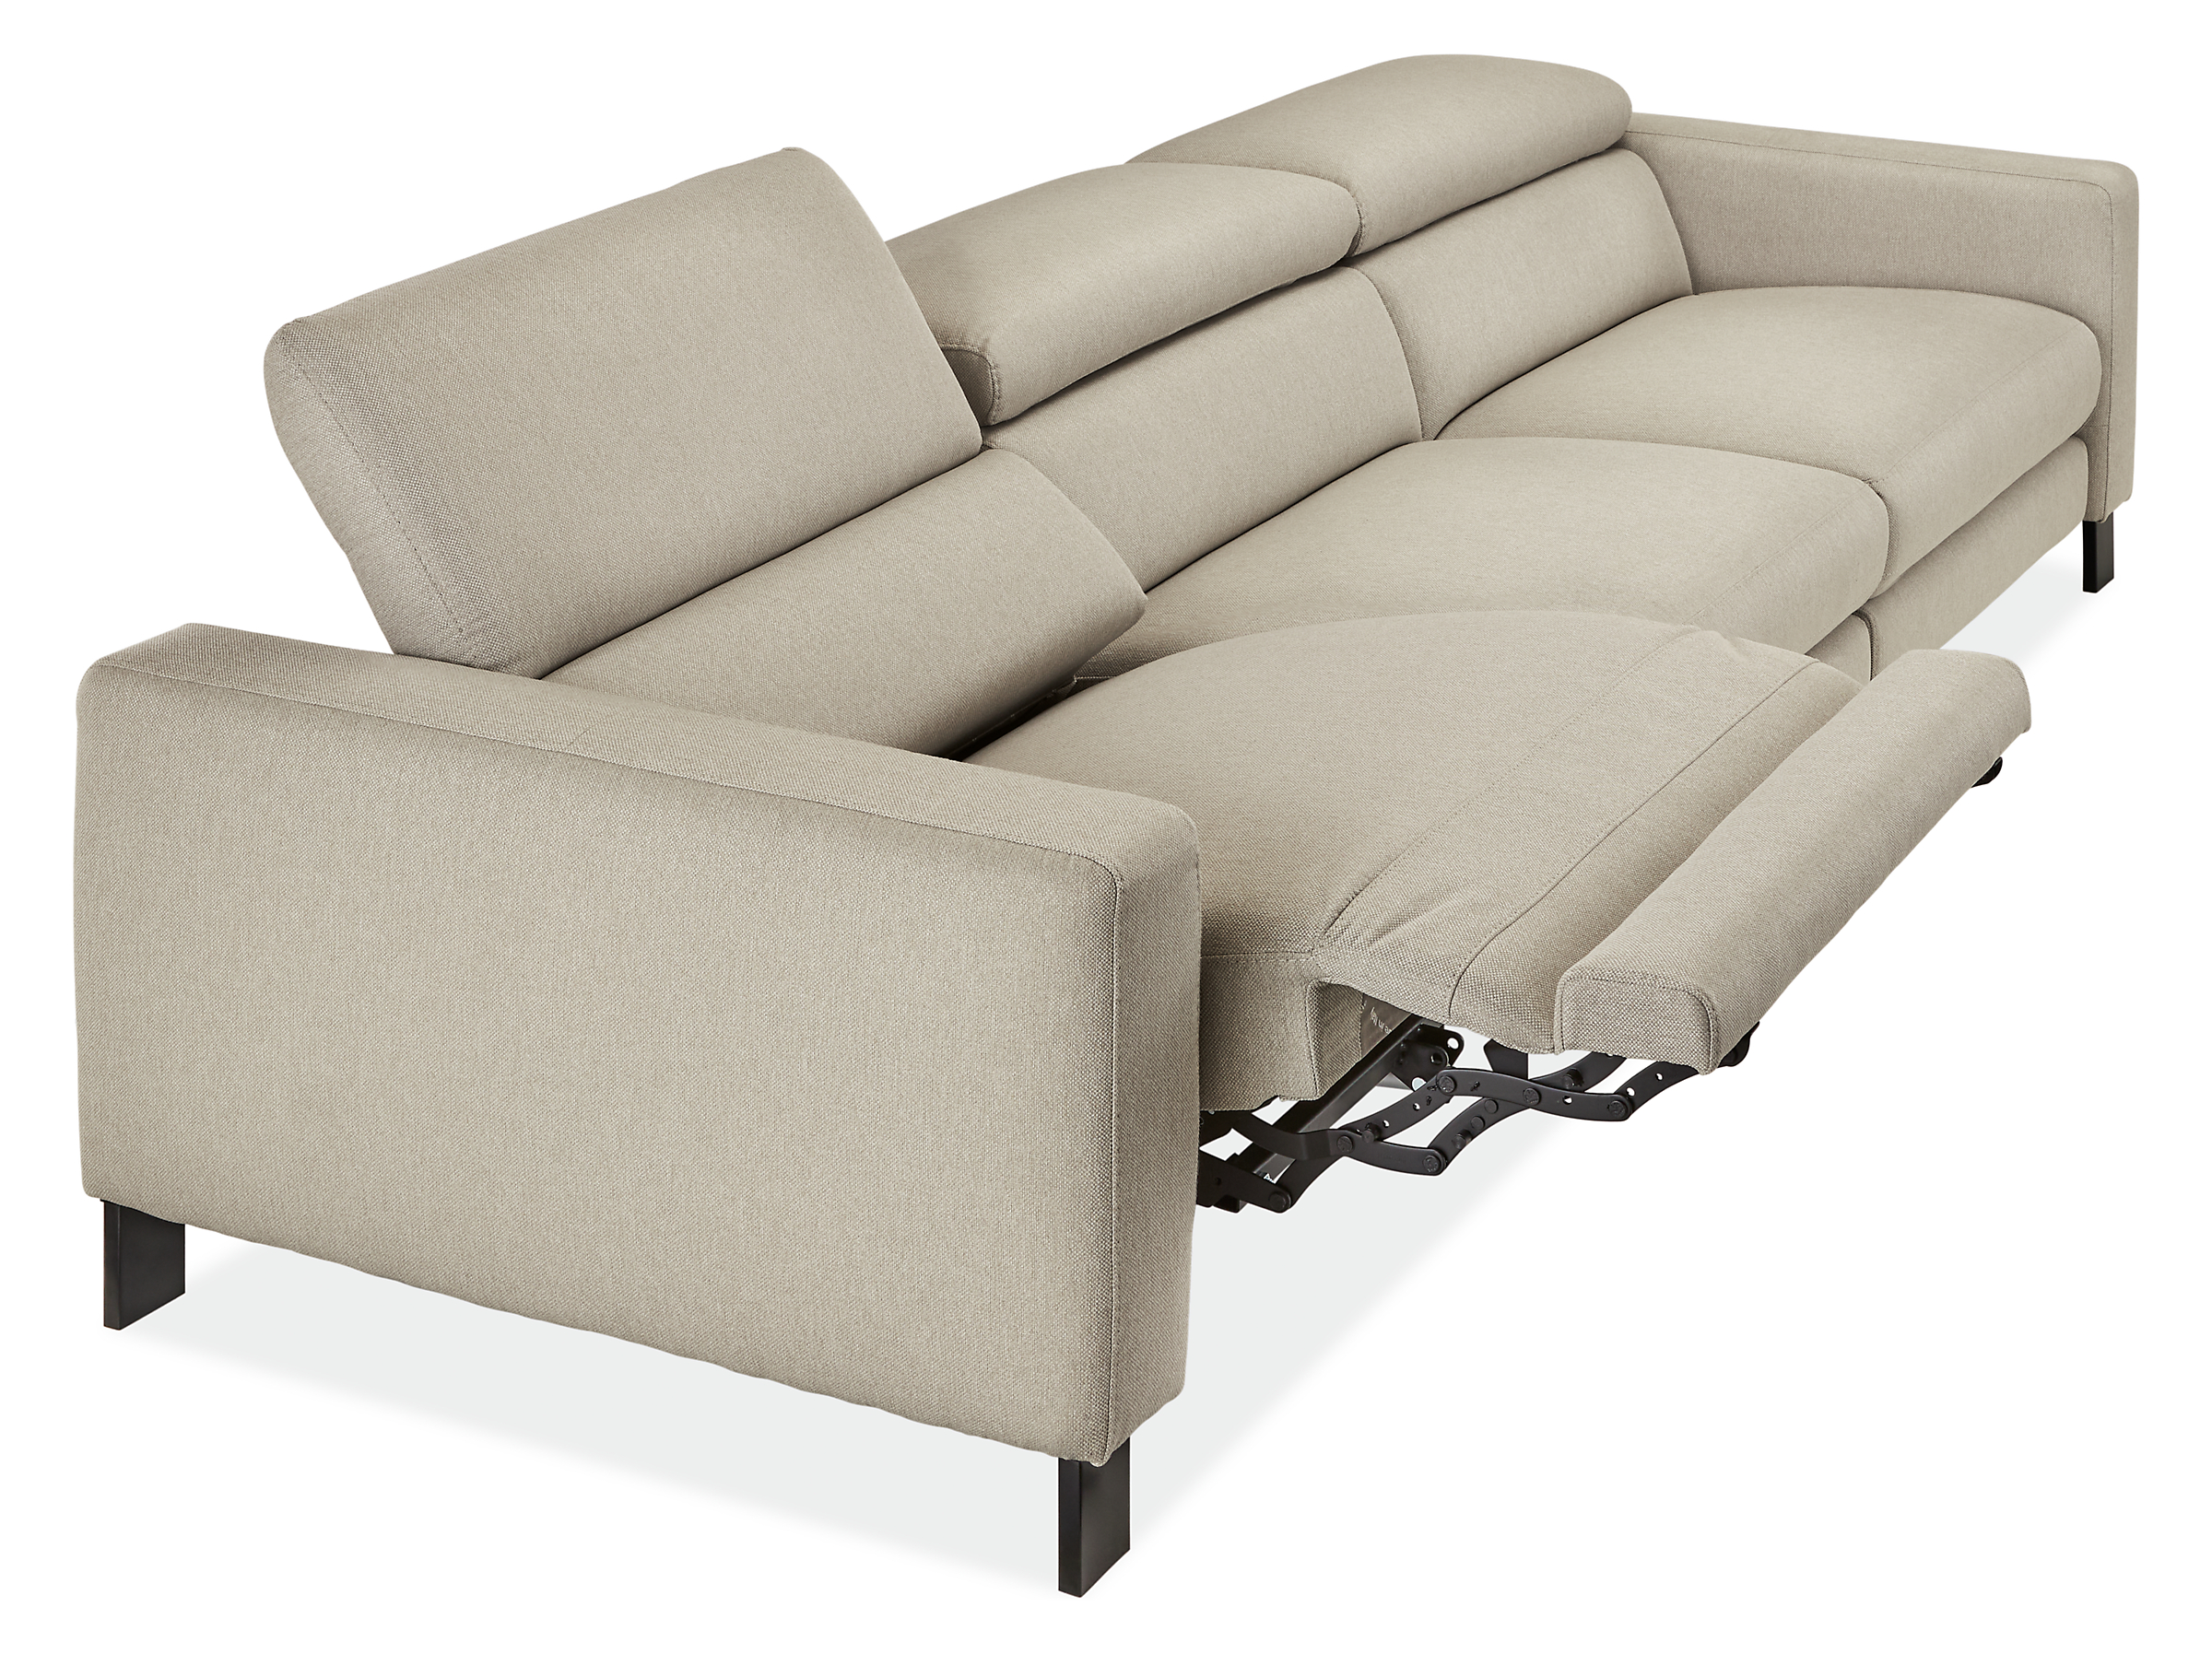 detail of gray Elio sofa with 1 headrest and 1 footrest extended, partially leaned back.